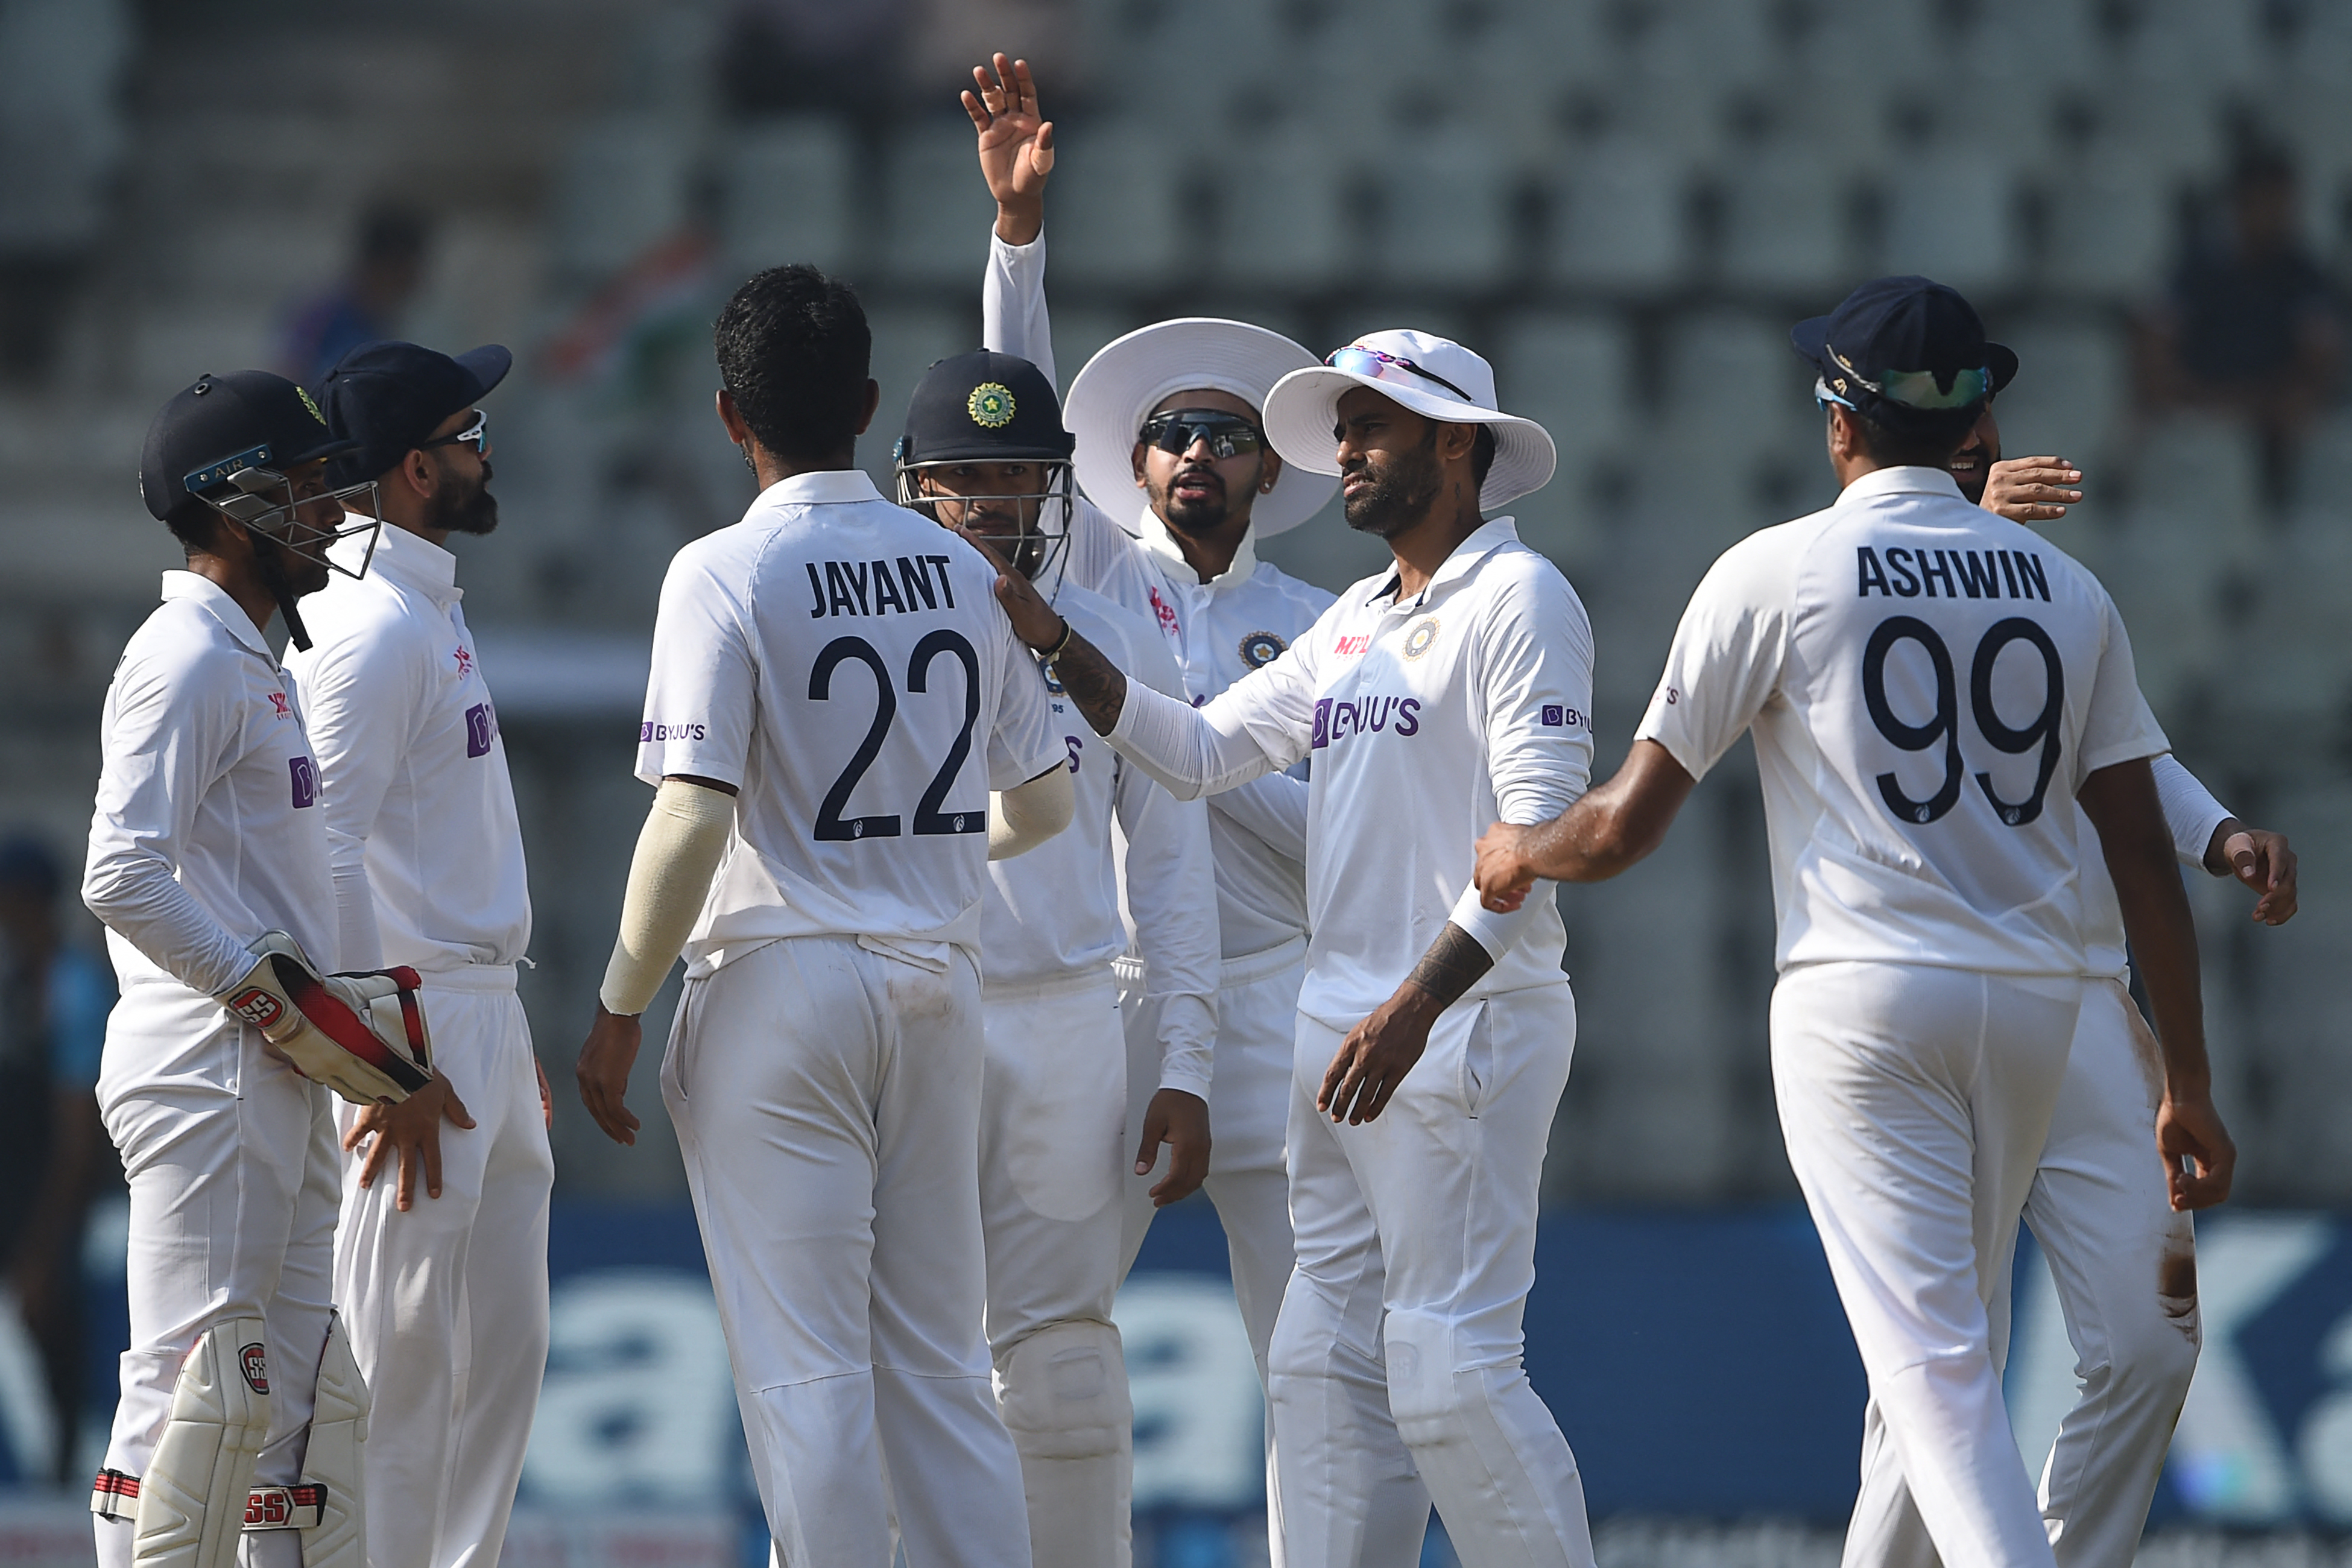 IND vs NZ | Twitter reacts as Jayant Yadav, R Ashwin run through New Zealand to complete India’s biggest ever Test win